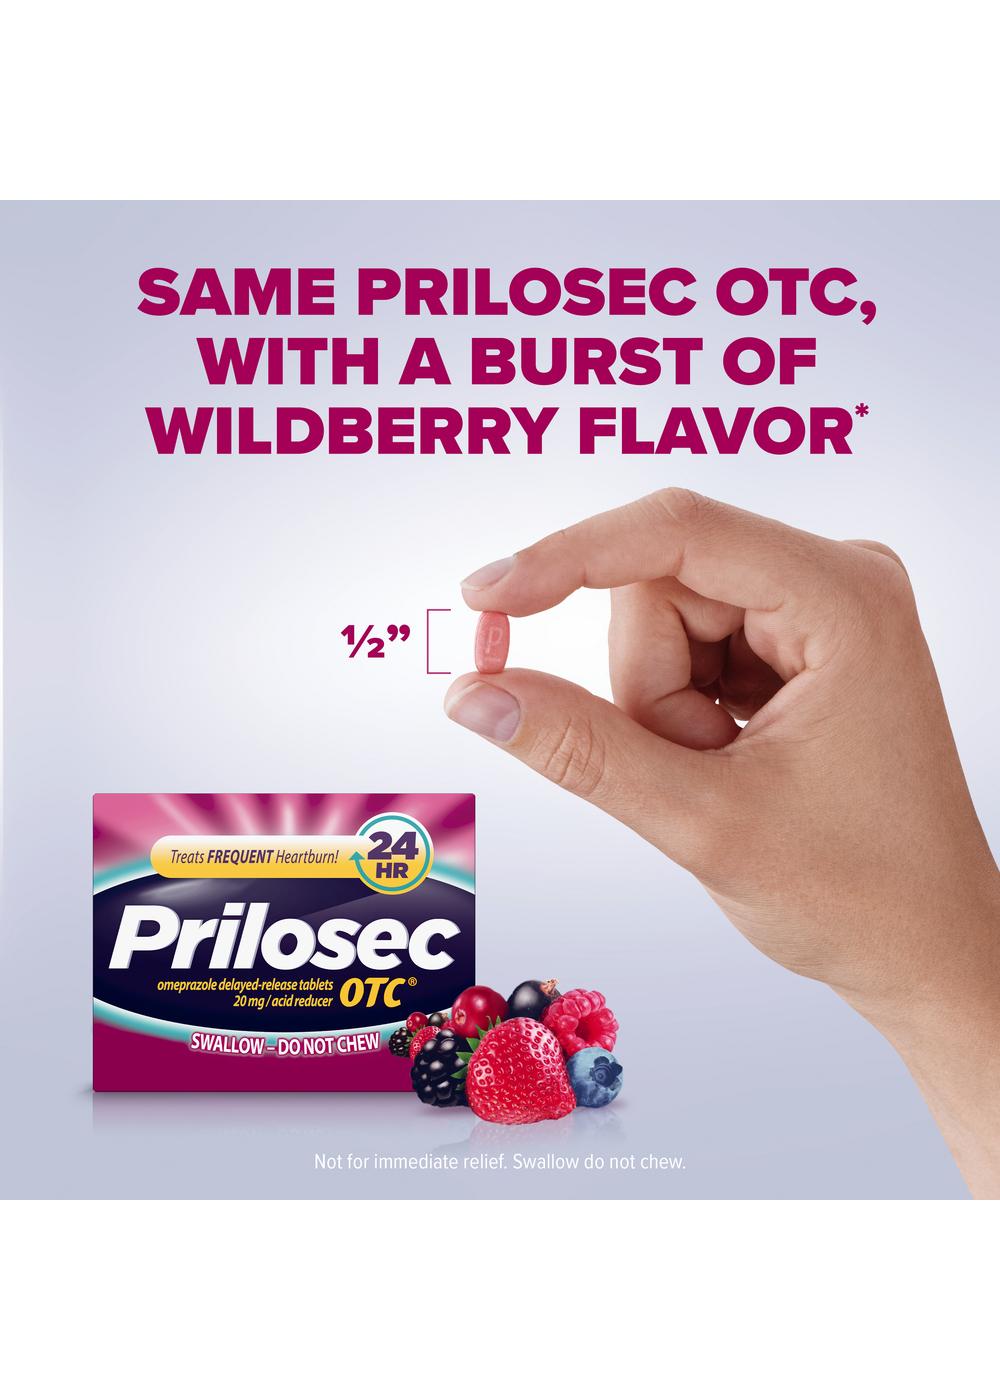 Prilosec Omeprazole Delayed Release Acid Reducer Tablets - Wildberry; image 6 of 9